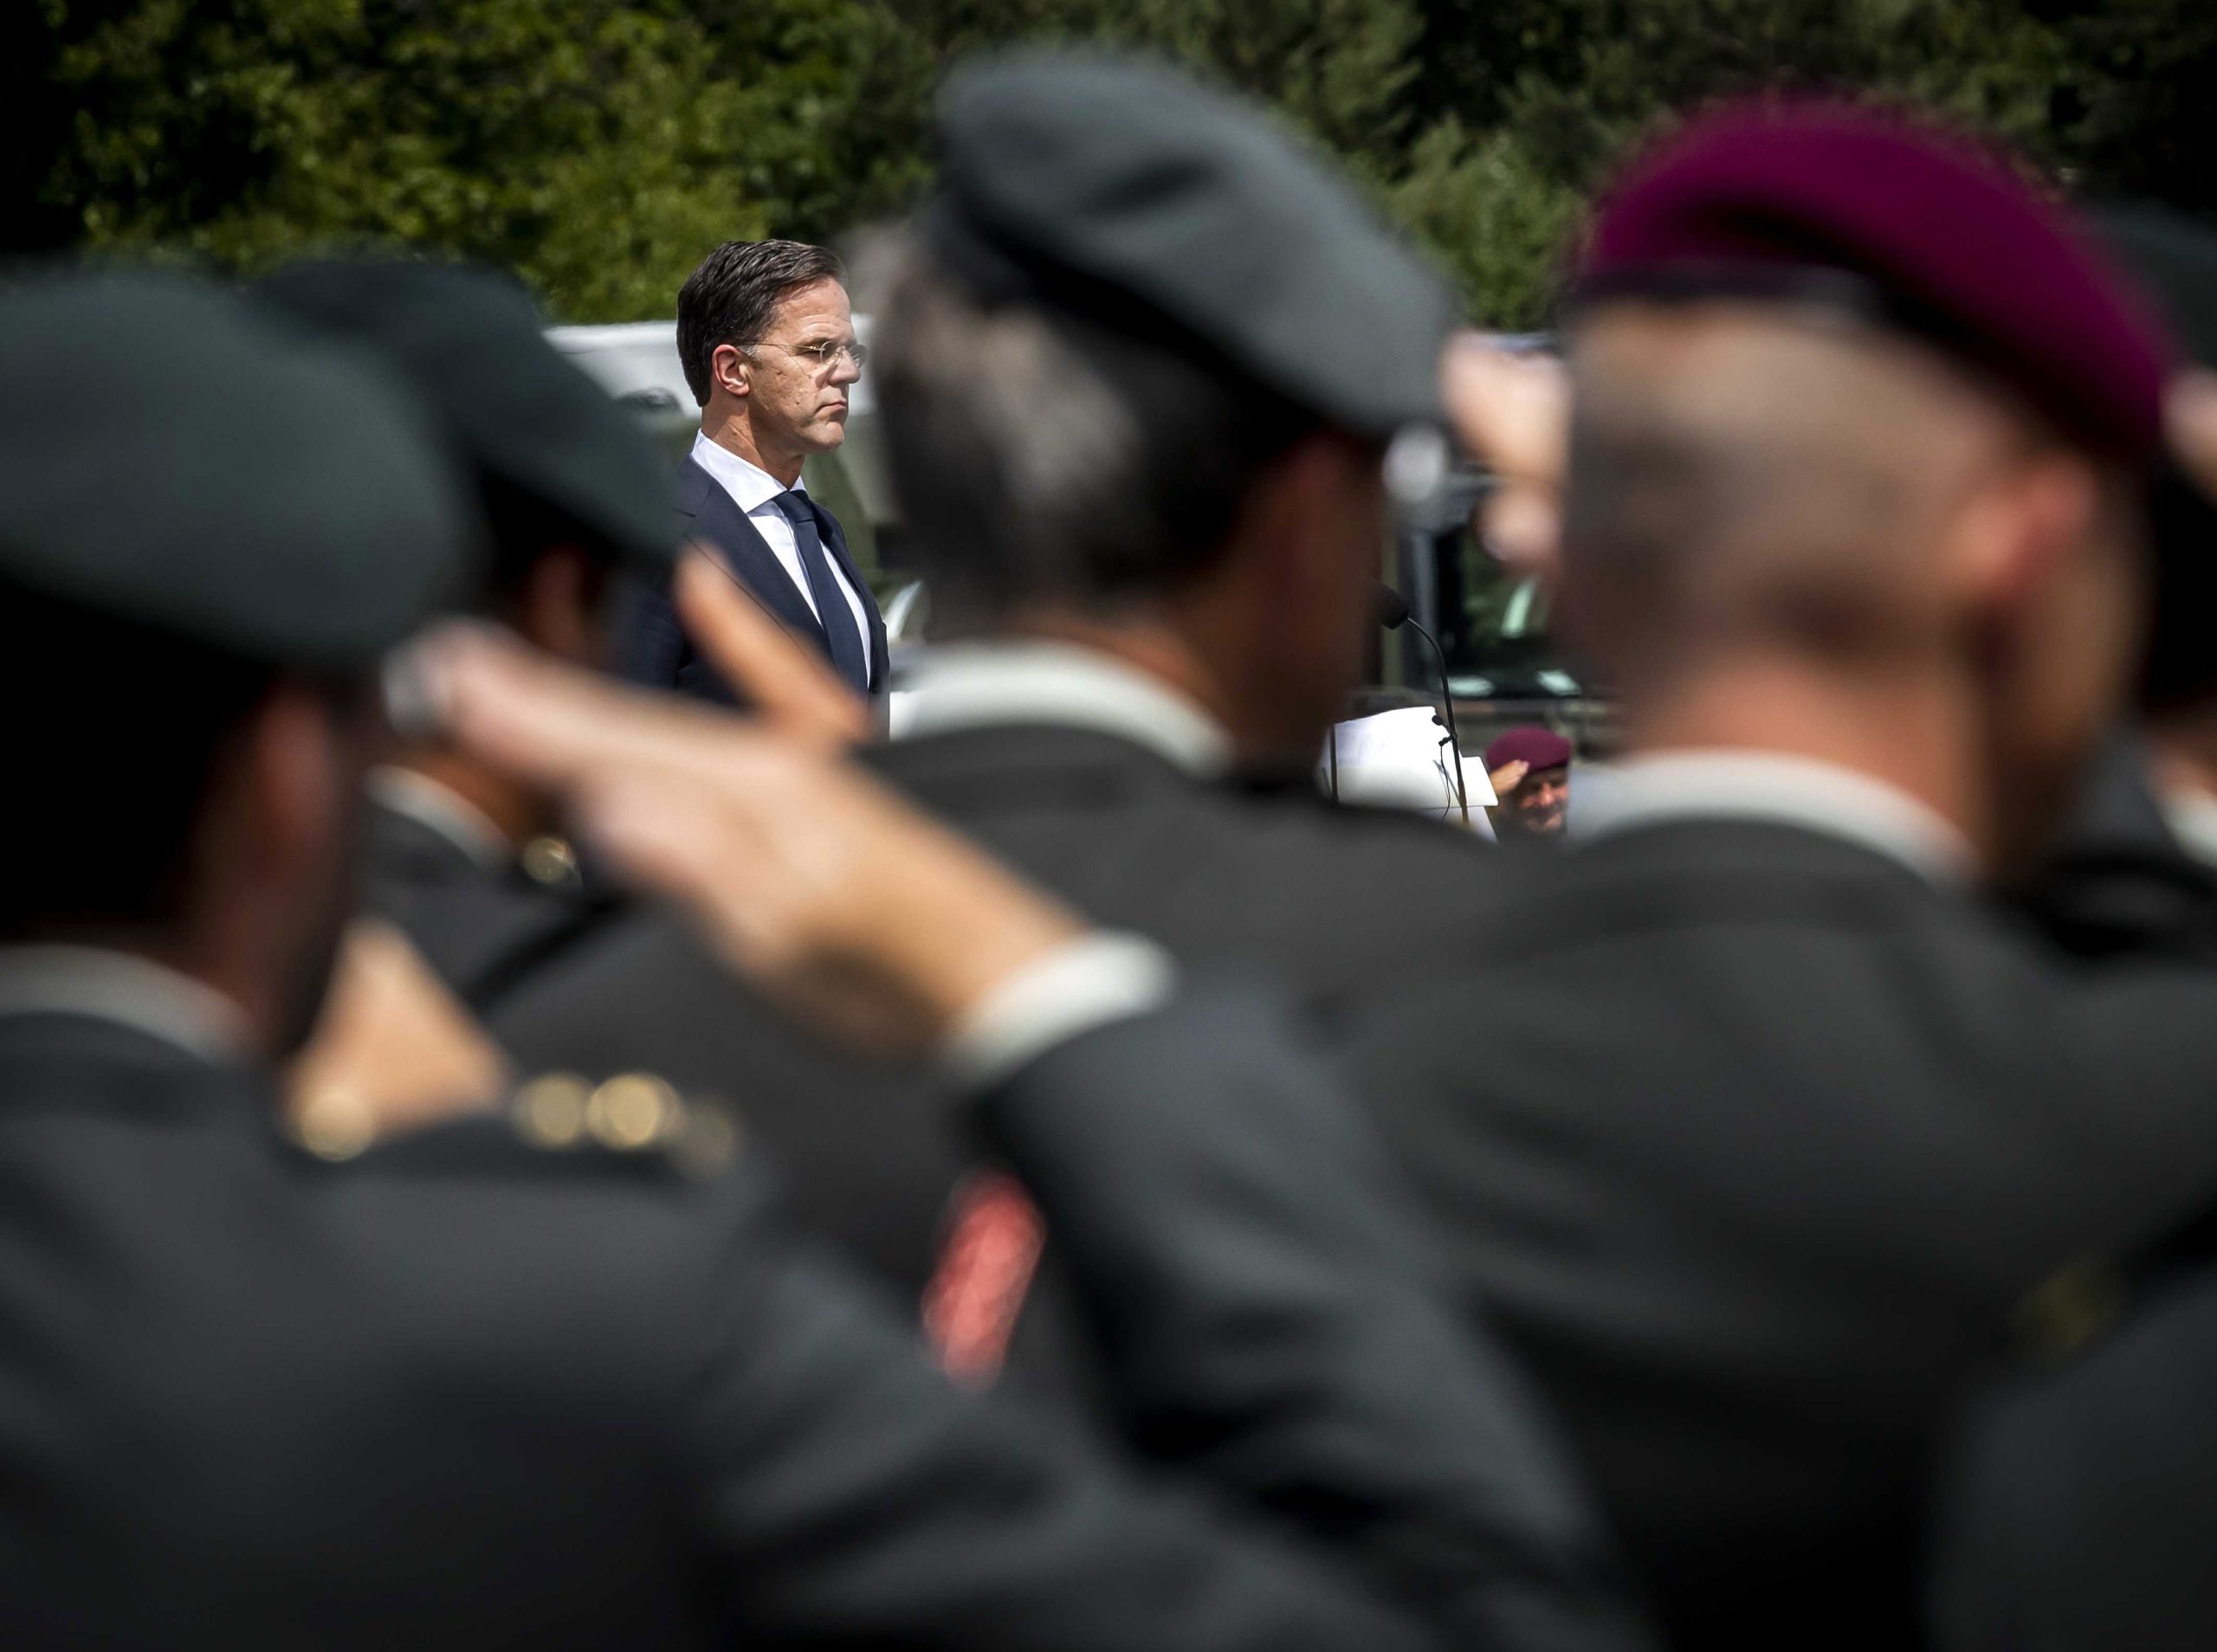 epa10020328 Prime Minister Mark Rutte gives a speech during a meeting of veterans of Dutchbat III peacekeeping unit in the Oranjekazerne in Schaarsbergen, Arnhem, Netherlands, 18 June 2022. Prime Minister Mark Rutte offered formal apologies from the Dutch government to soldiers of Dutchbat-III peacekeeping unit who had to guard the Bosnian enclave of Srebrenica in 1995  EPA/REMKO DE WAAL